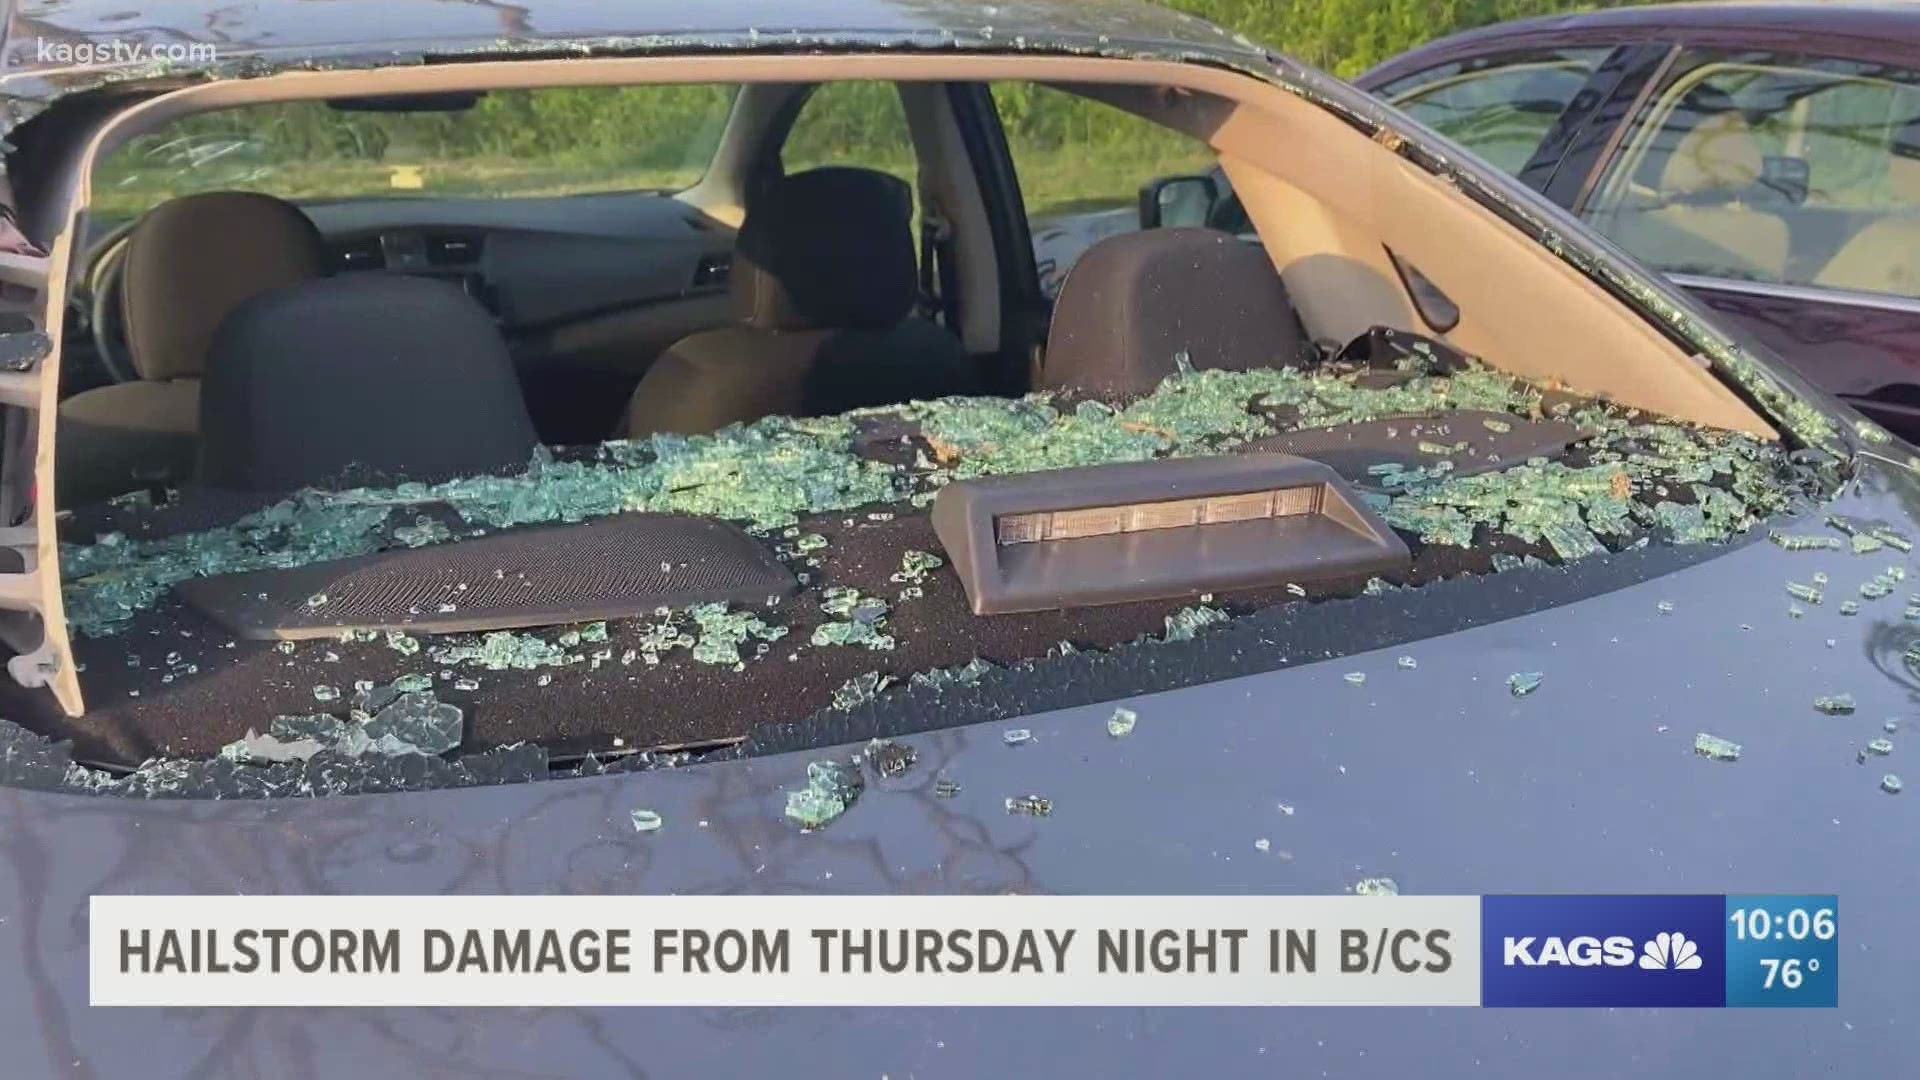 The first hail storm of 2021 hit Bryan/College Station Thursday night leaving devastating damage to cars and buildings everywhere.